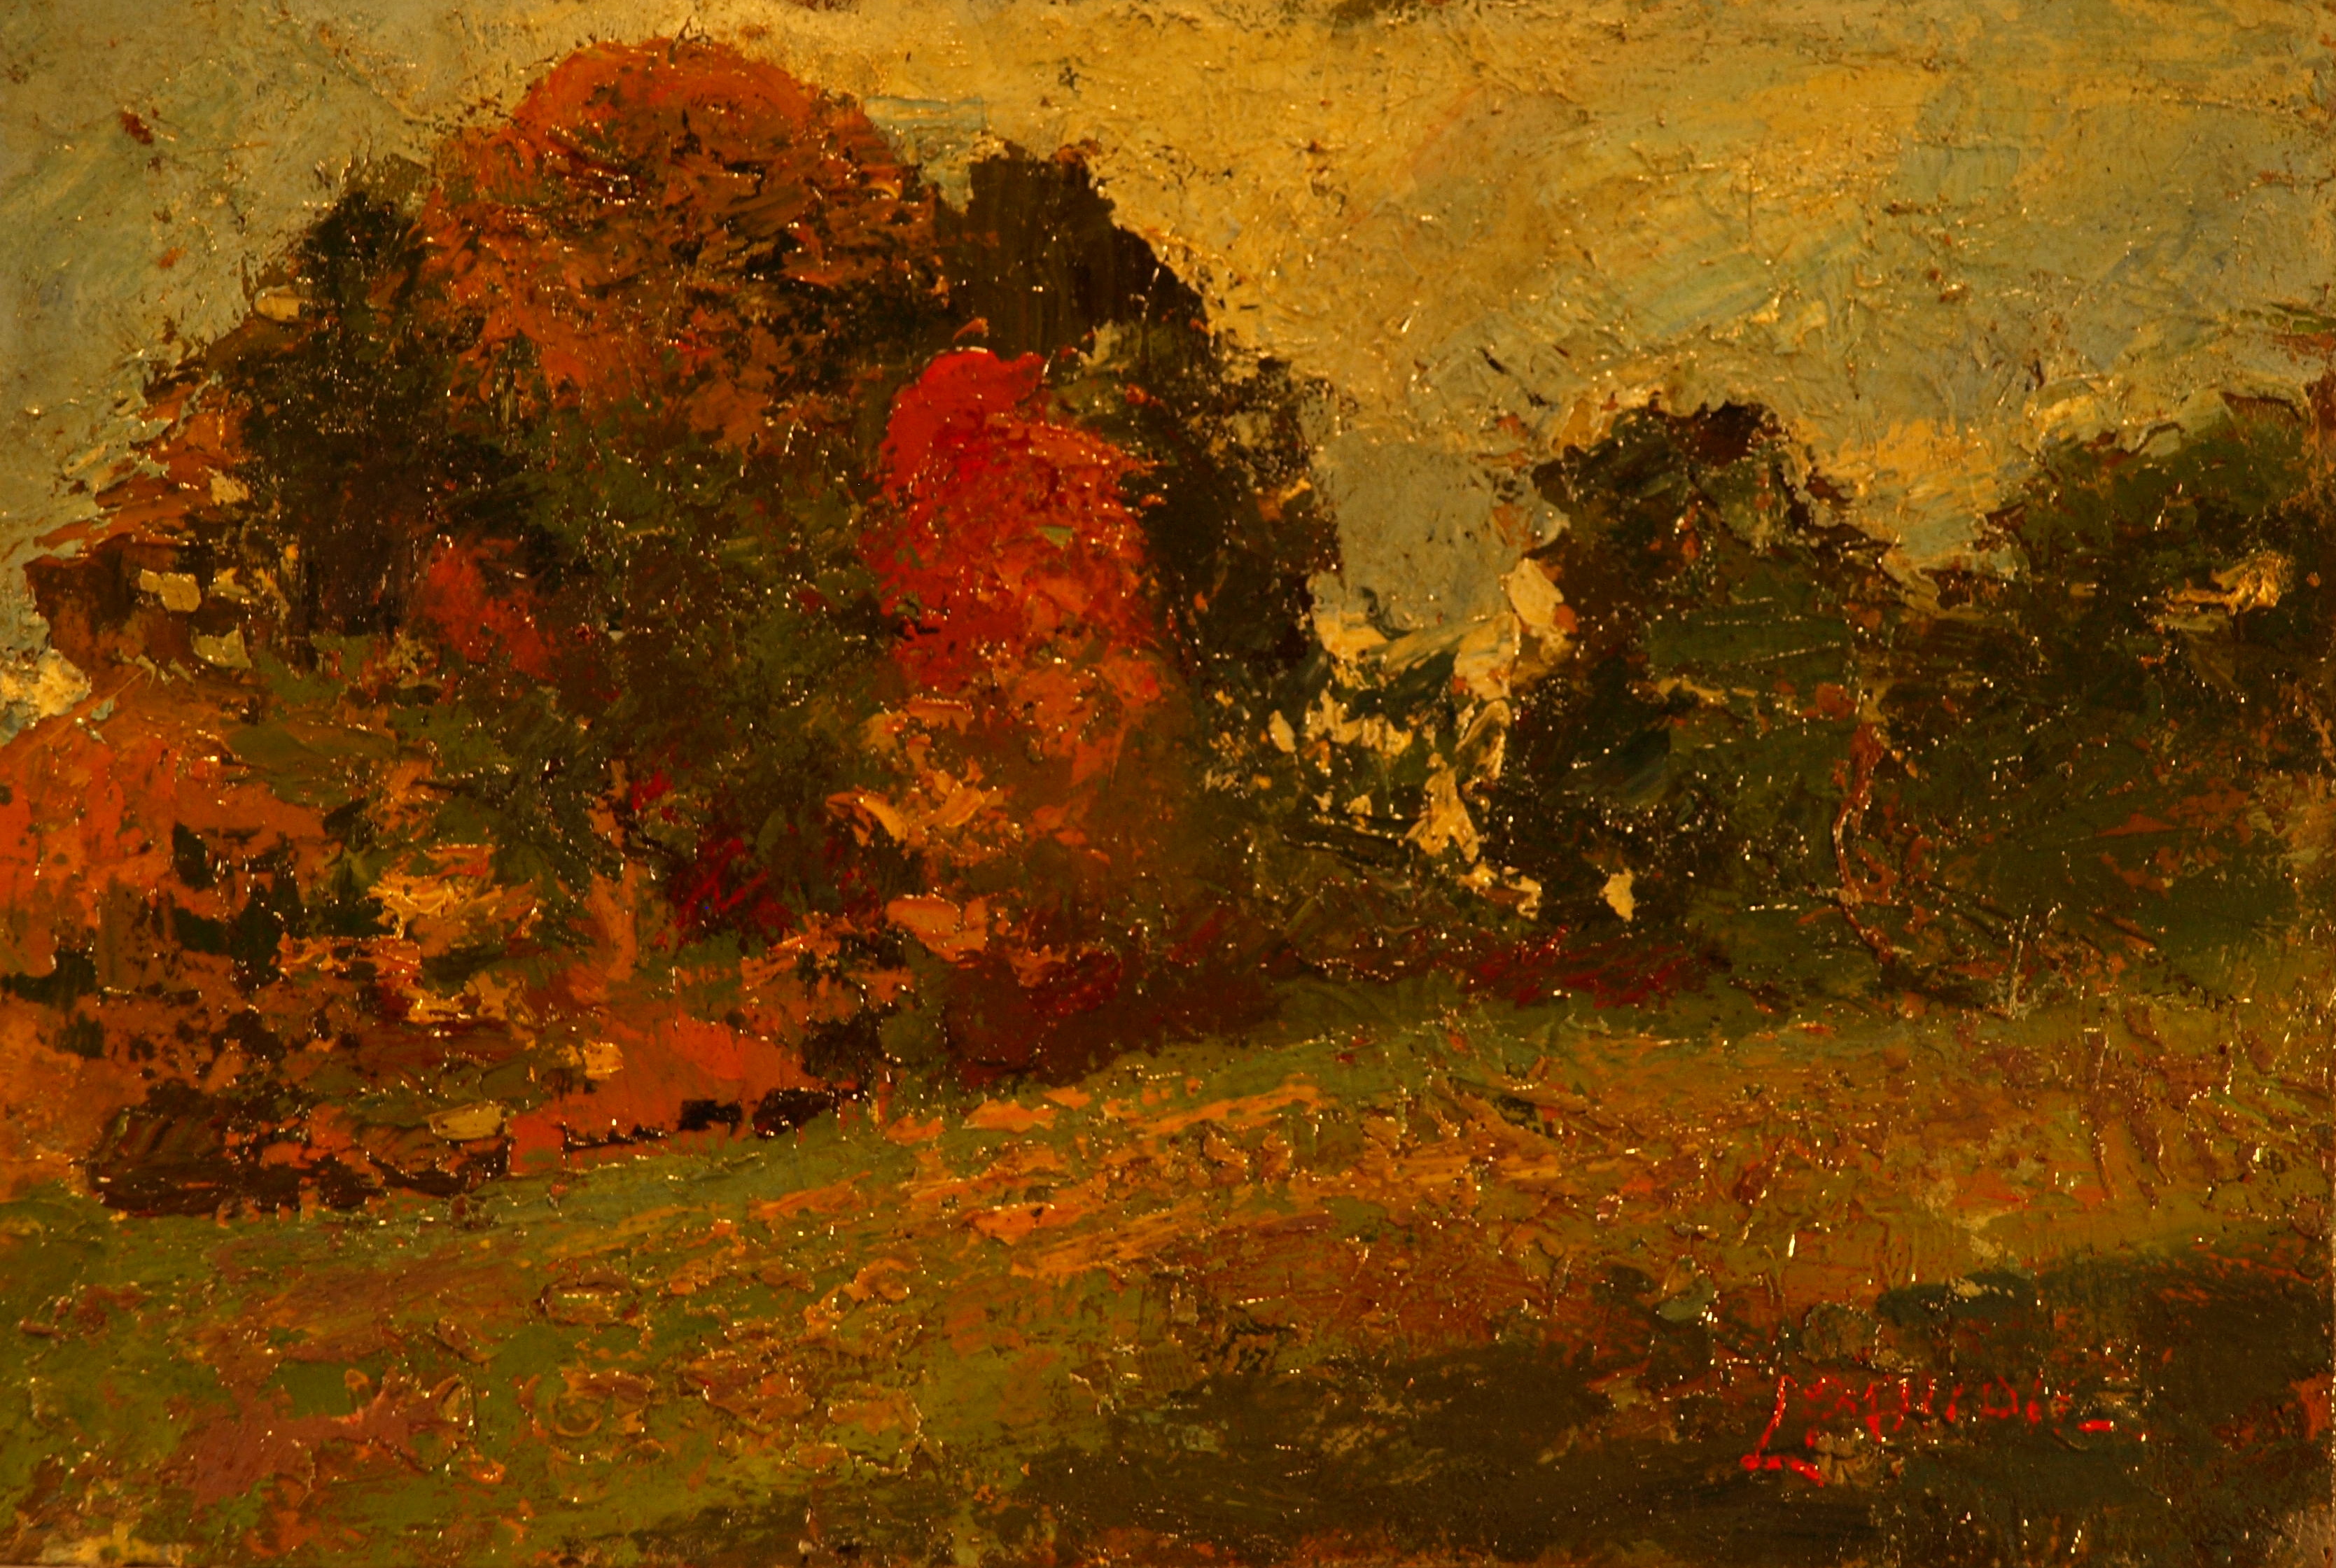 The Red Tree, Oil on Panel, 8 x 12 Inches, by Bernard Lennon, $300